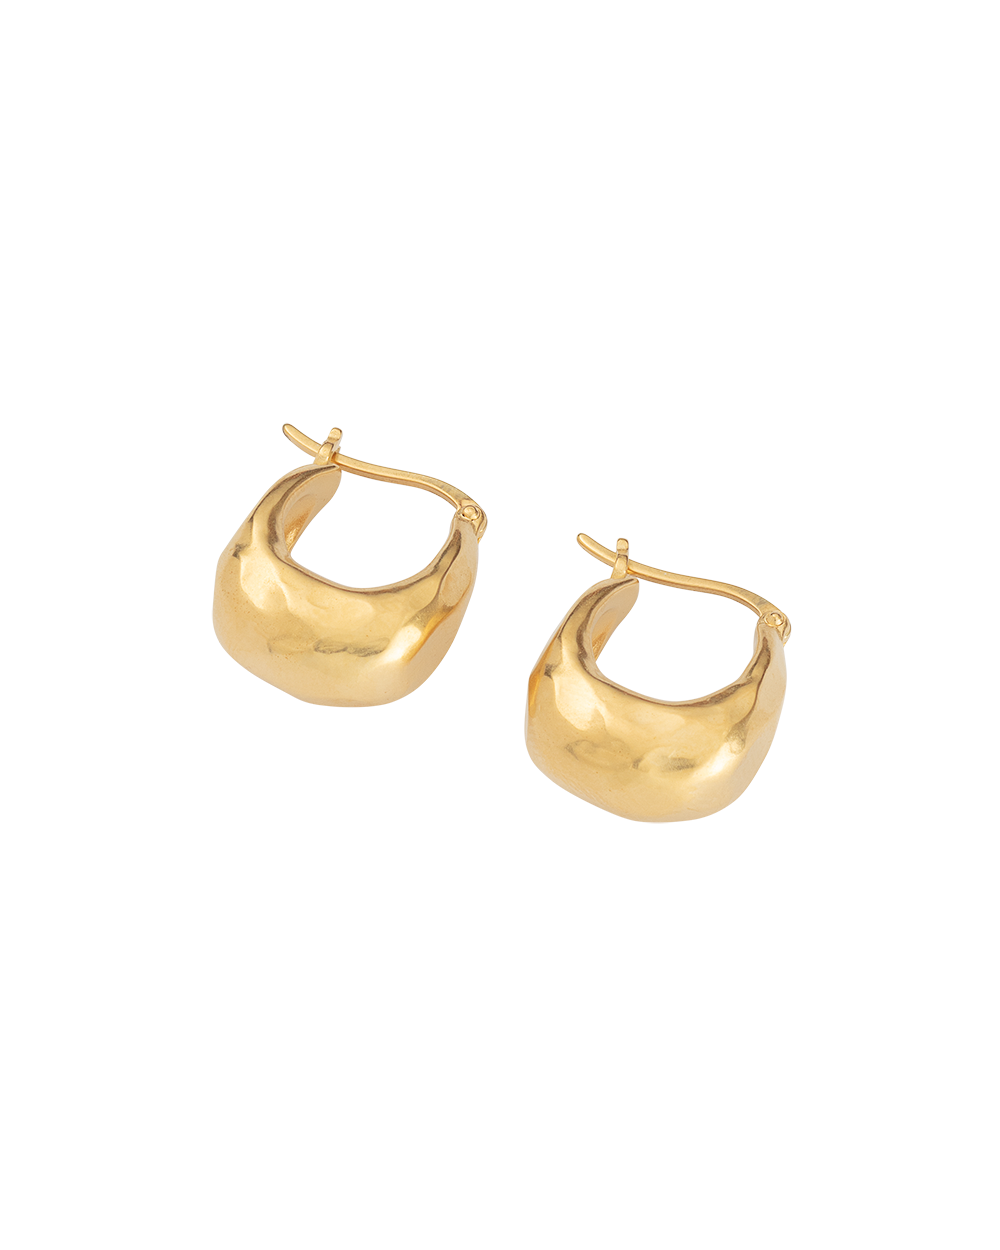 ESSENCE HOOPS SMALL (18K GOLD PLATED) - IMAGE 6